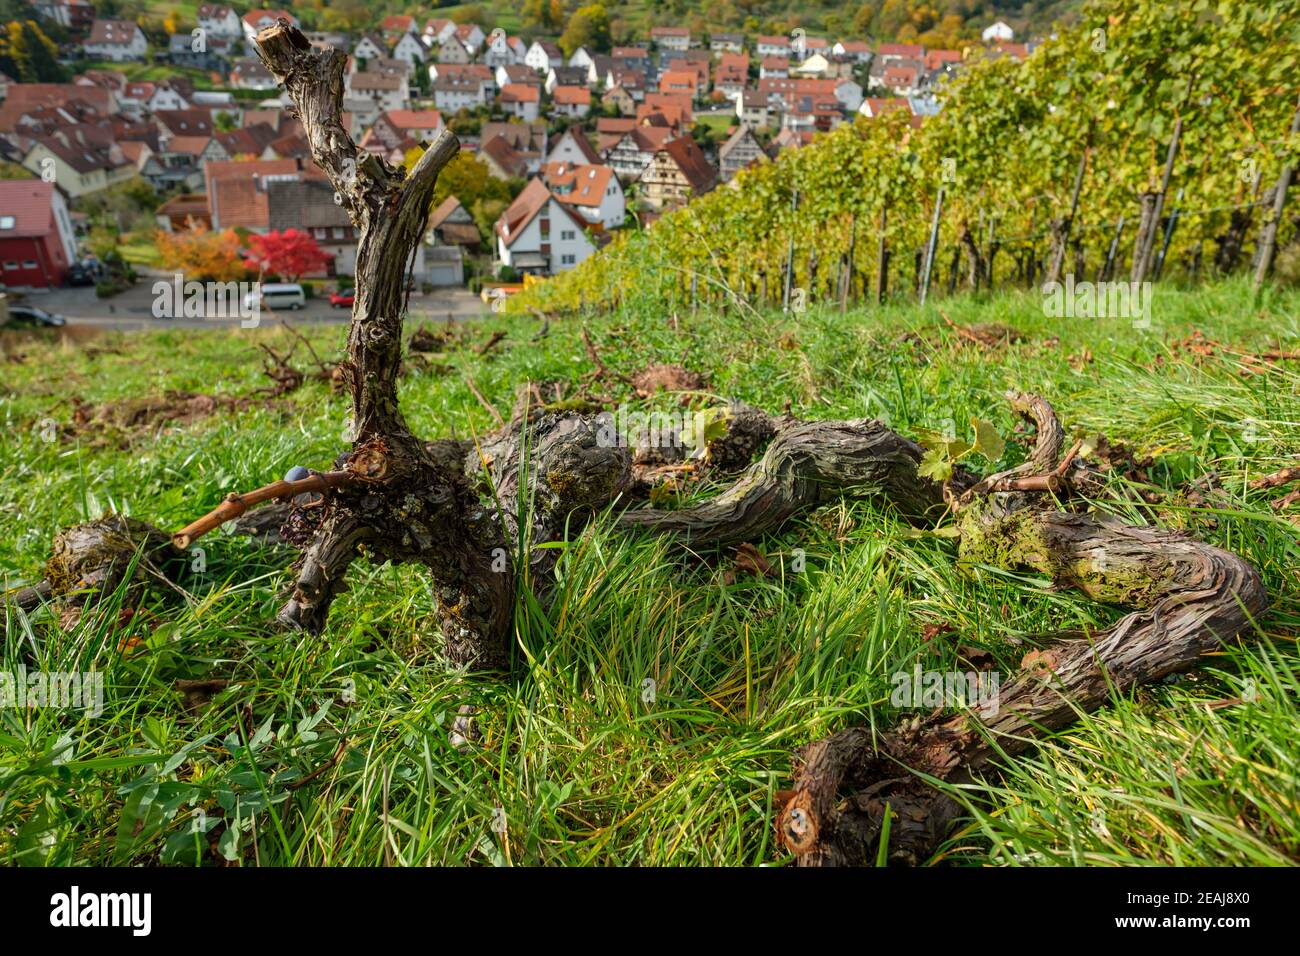 Clearing vineyard with wooden gnarled vines Stock Photo